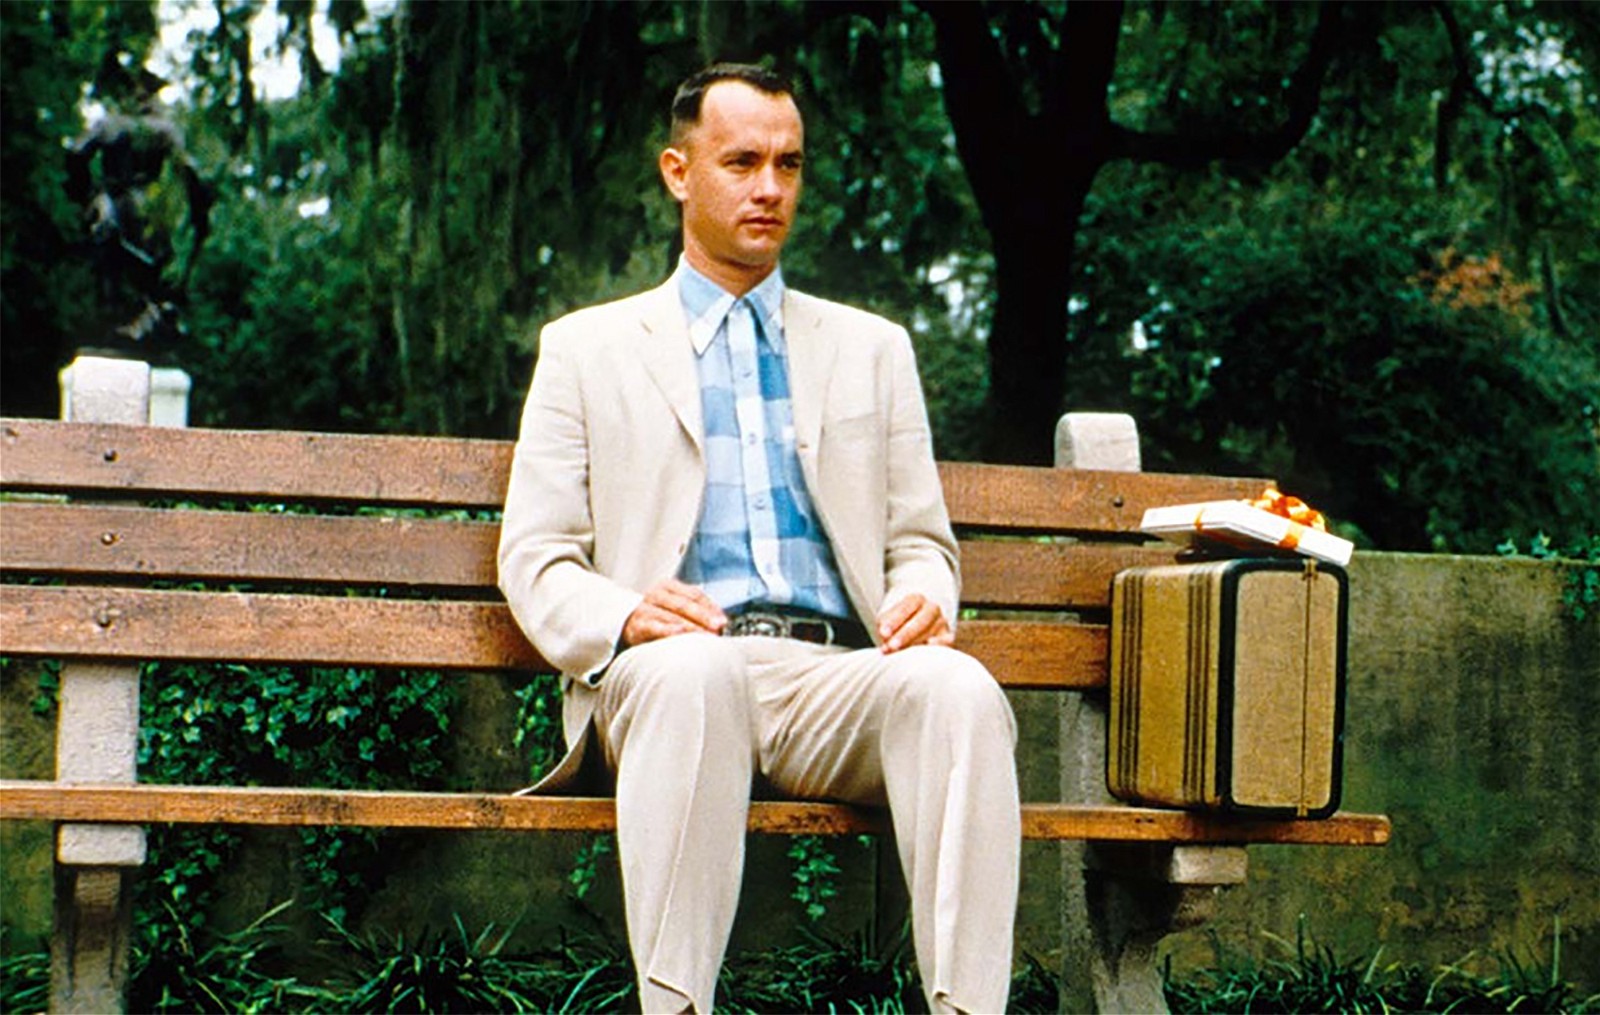 Tom Hanks in and as Forrest Gump